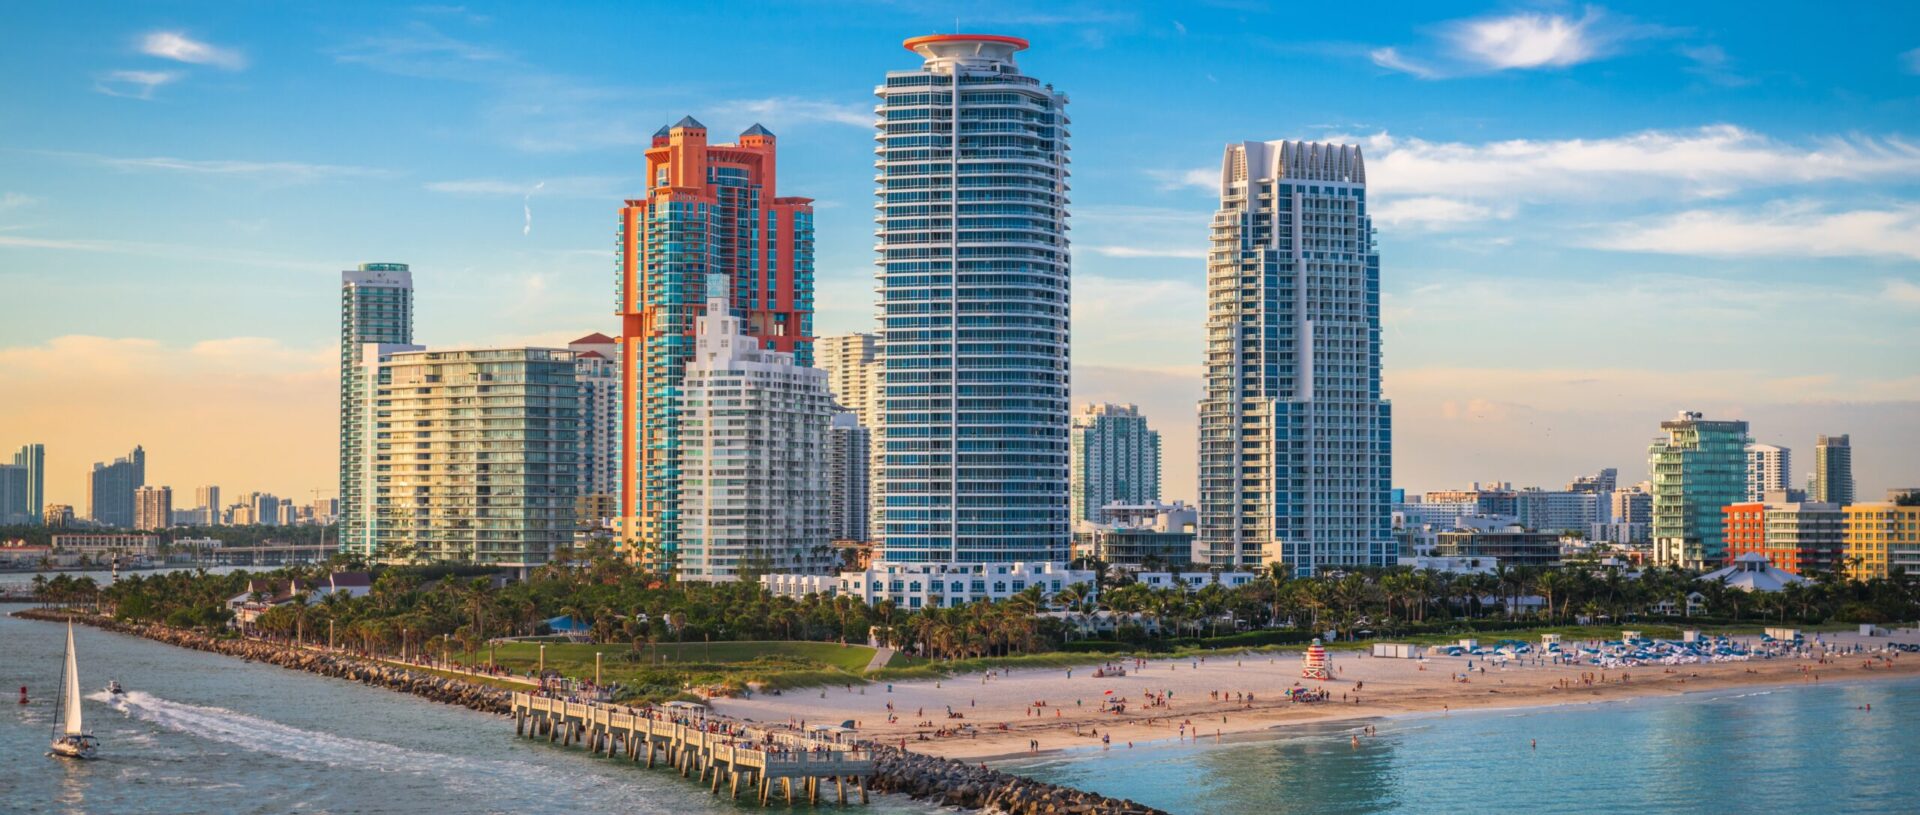 Florida Is The Most Competitive Market For Renters